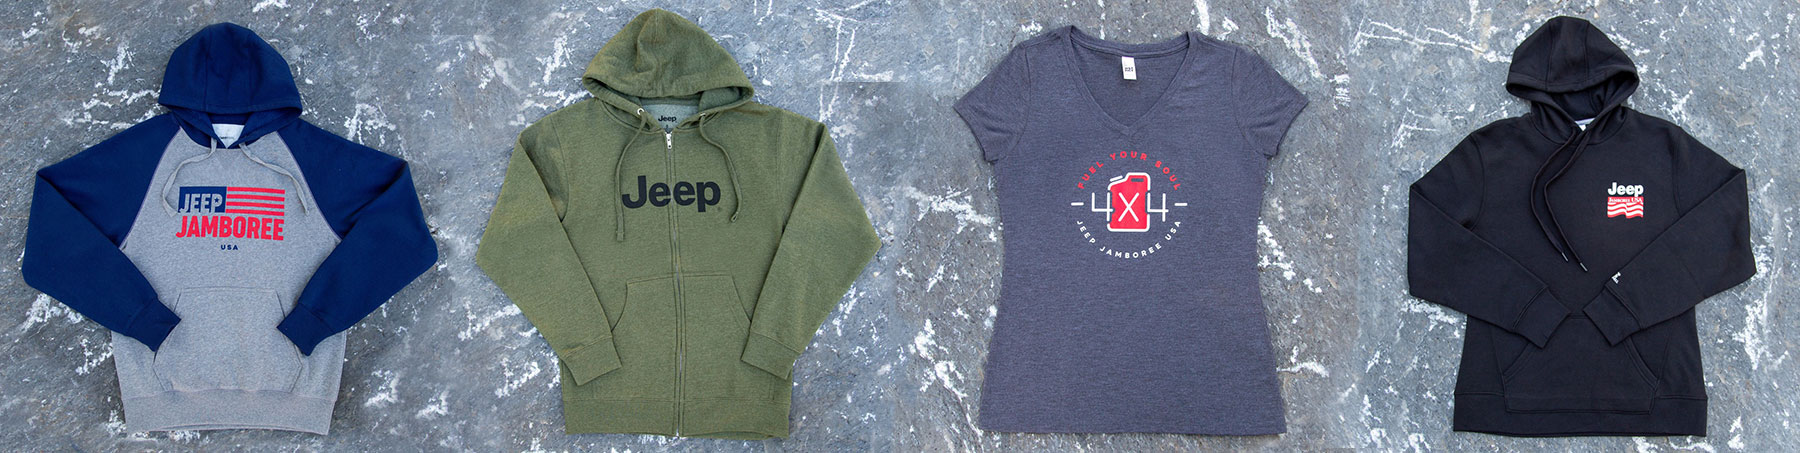 jeep clothing